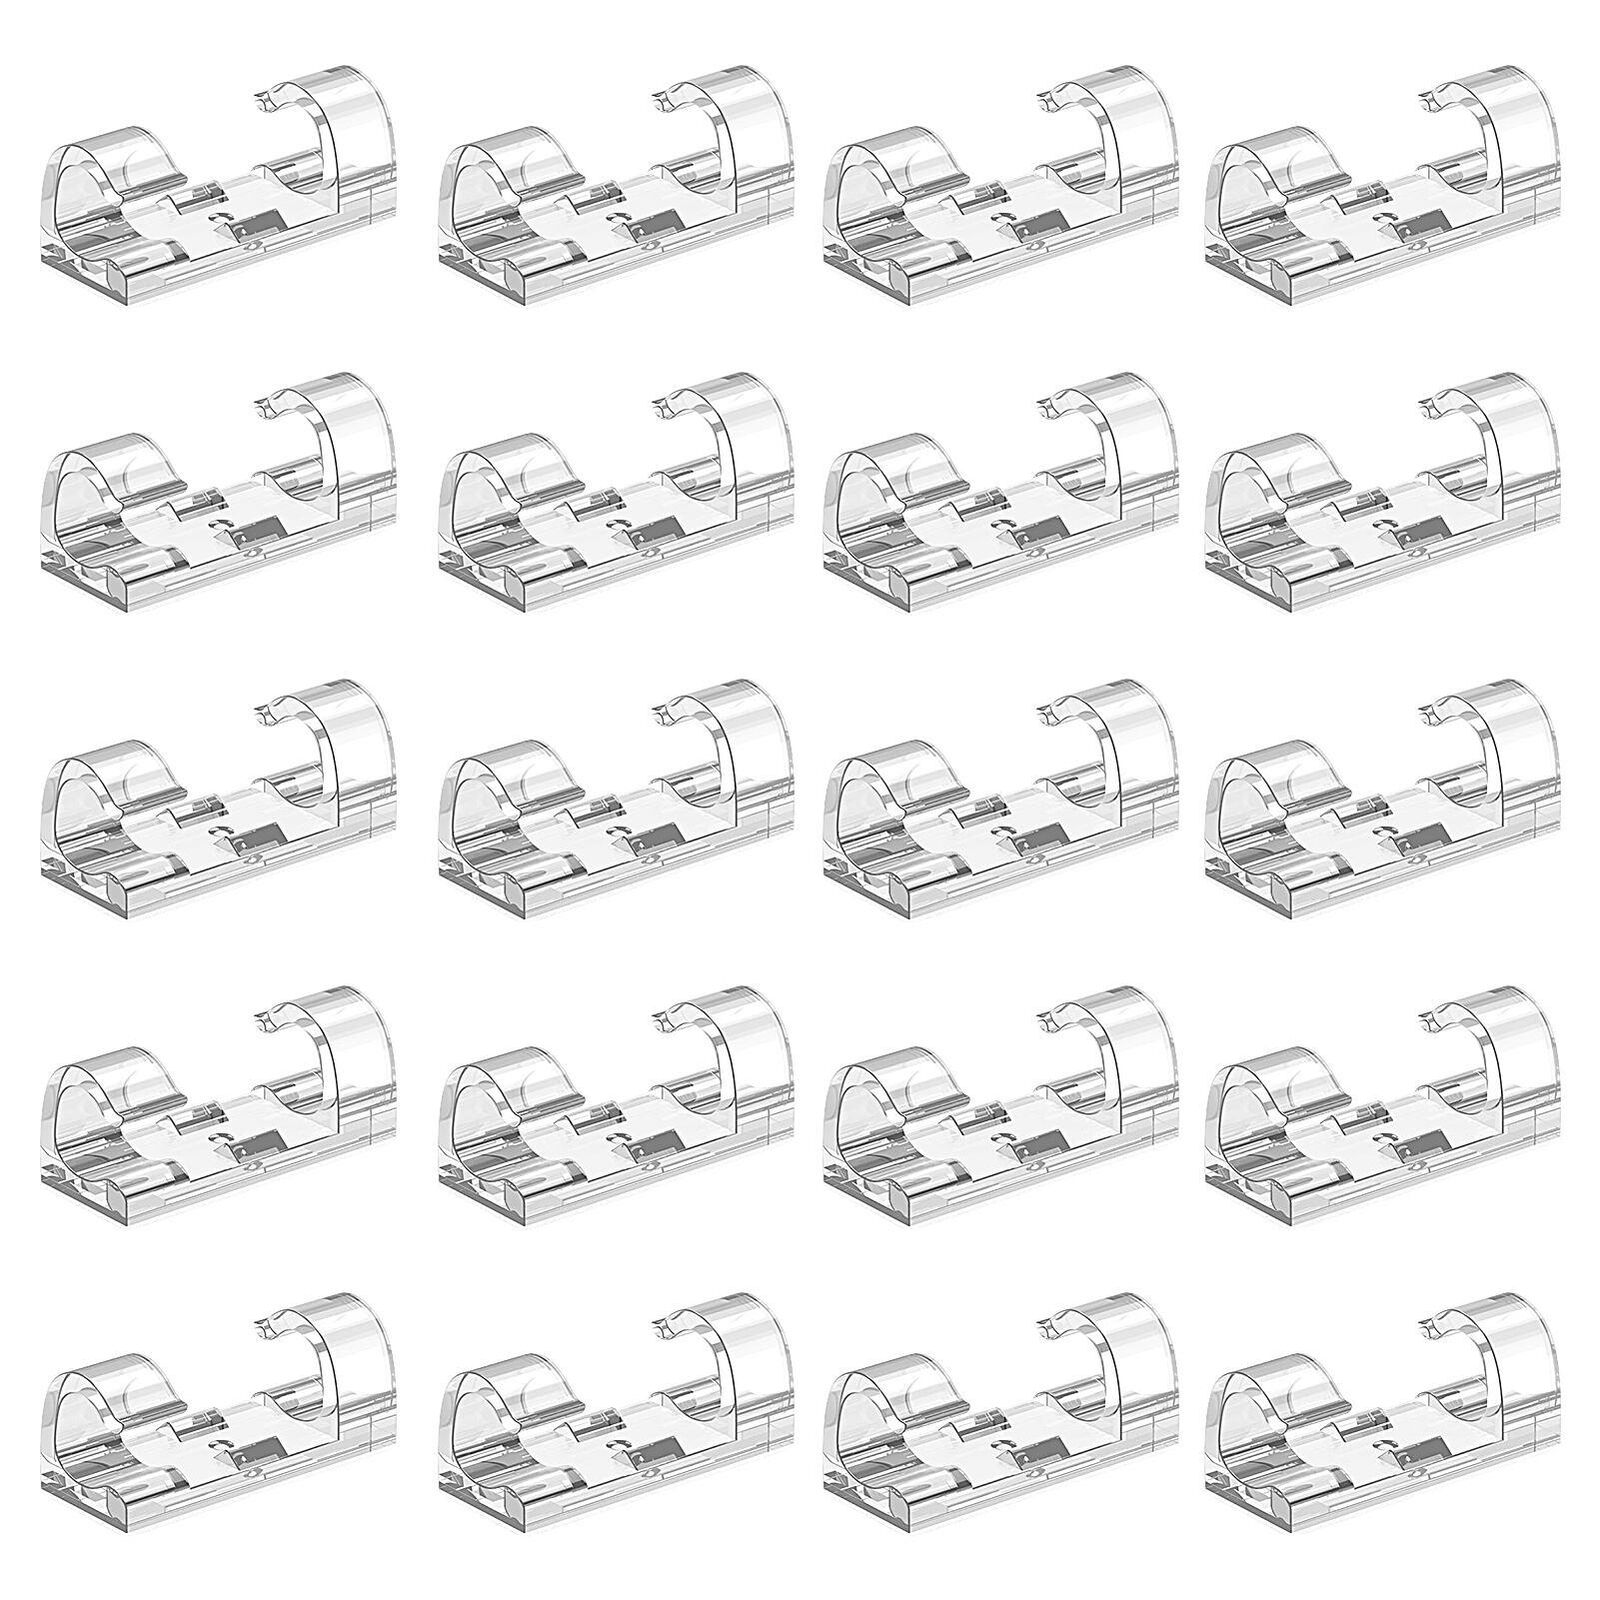 Adhesive Cable Clips Set of 20pcs No Drilling Cord Management for USB Cables